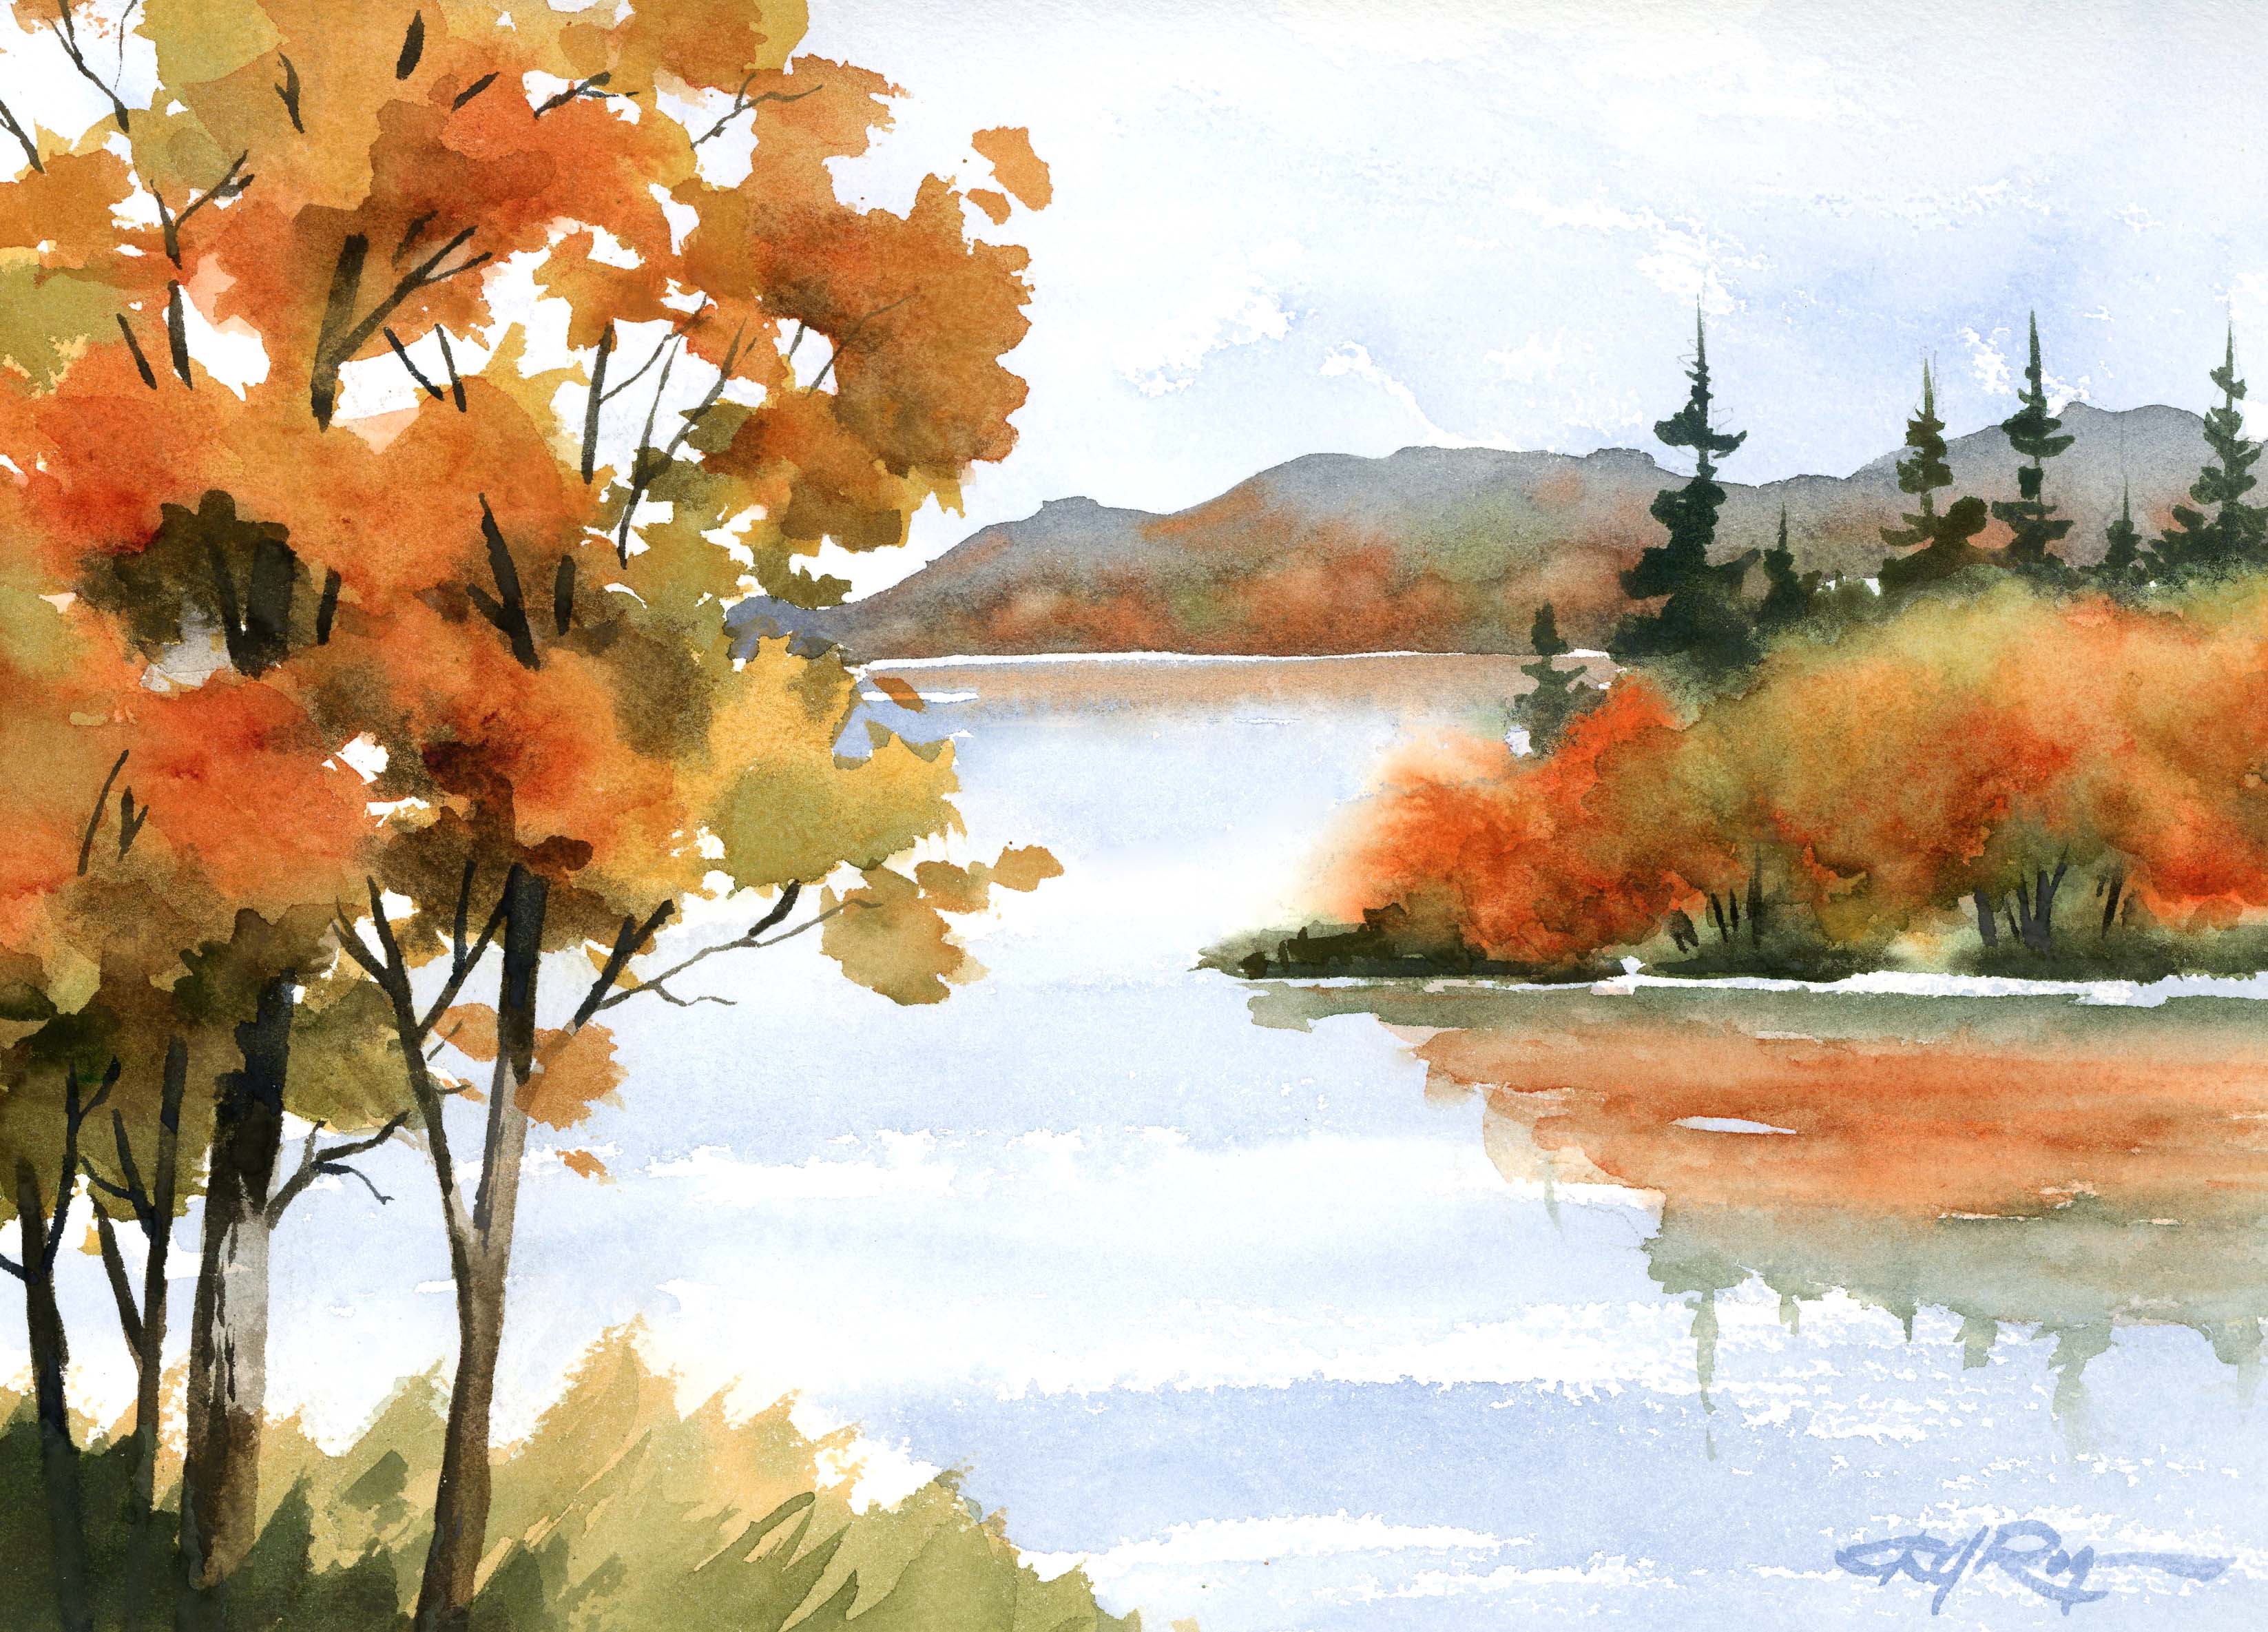 Buy Autumn Art Print Landscape Watercolor Painting Lake Wall Art Canvas Art  Print by APOORVA NETI. Code:PRT_7329_60519 - Prints for Sale online in  India.